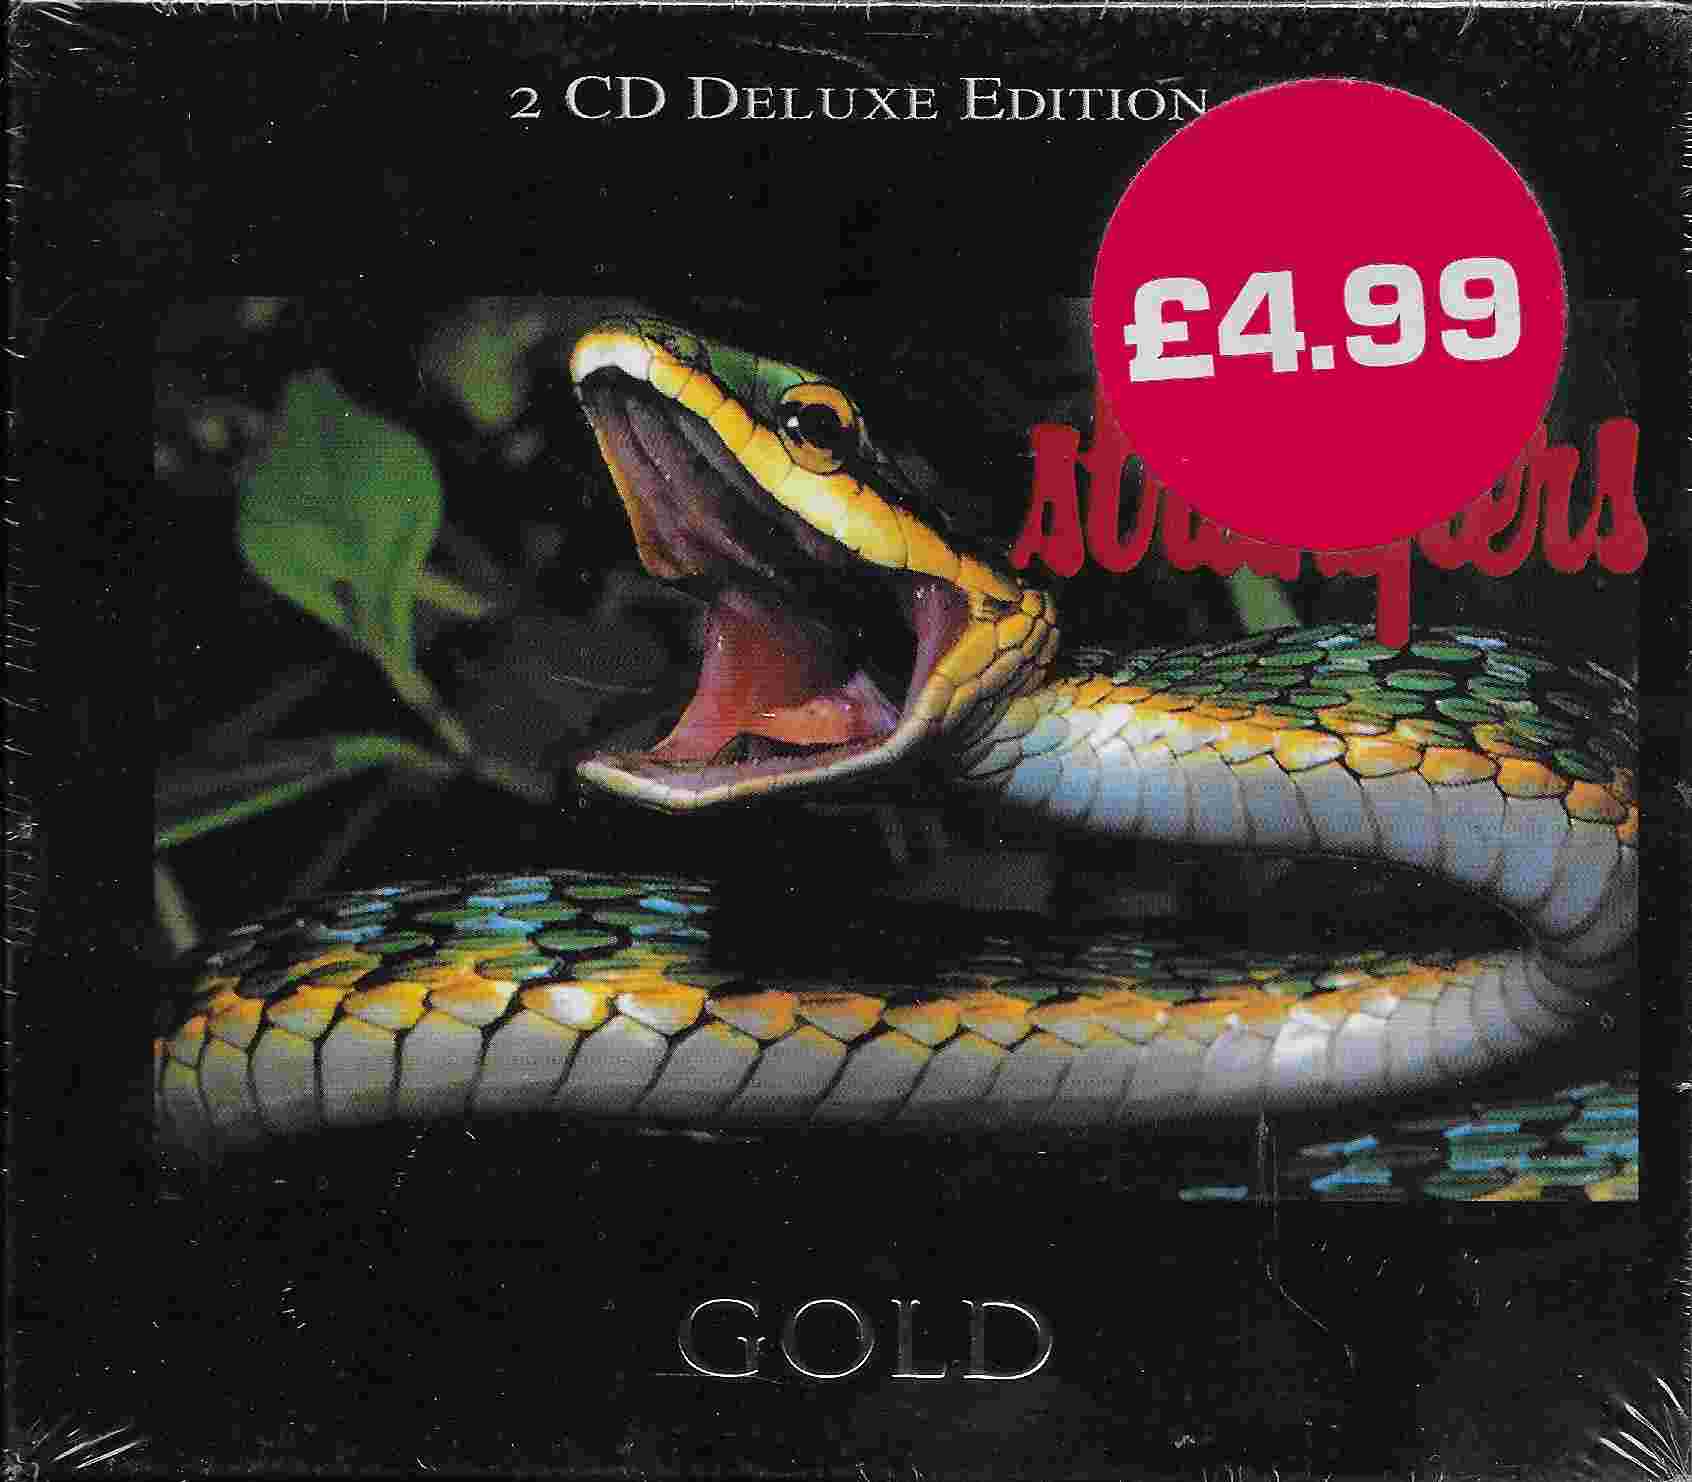 Picture of R2CD 42-57 Gold by artist The Stranglers from The Stranglers